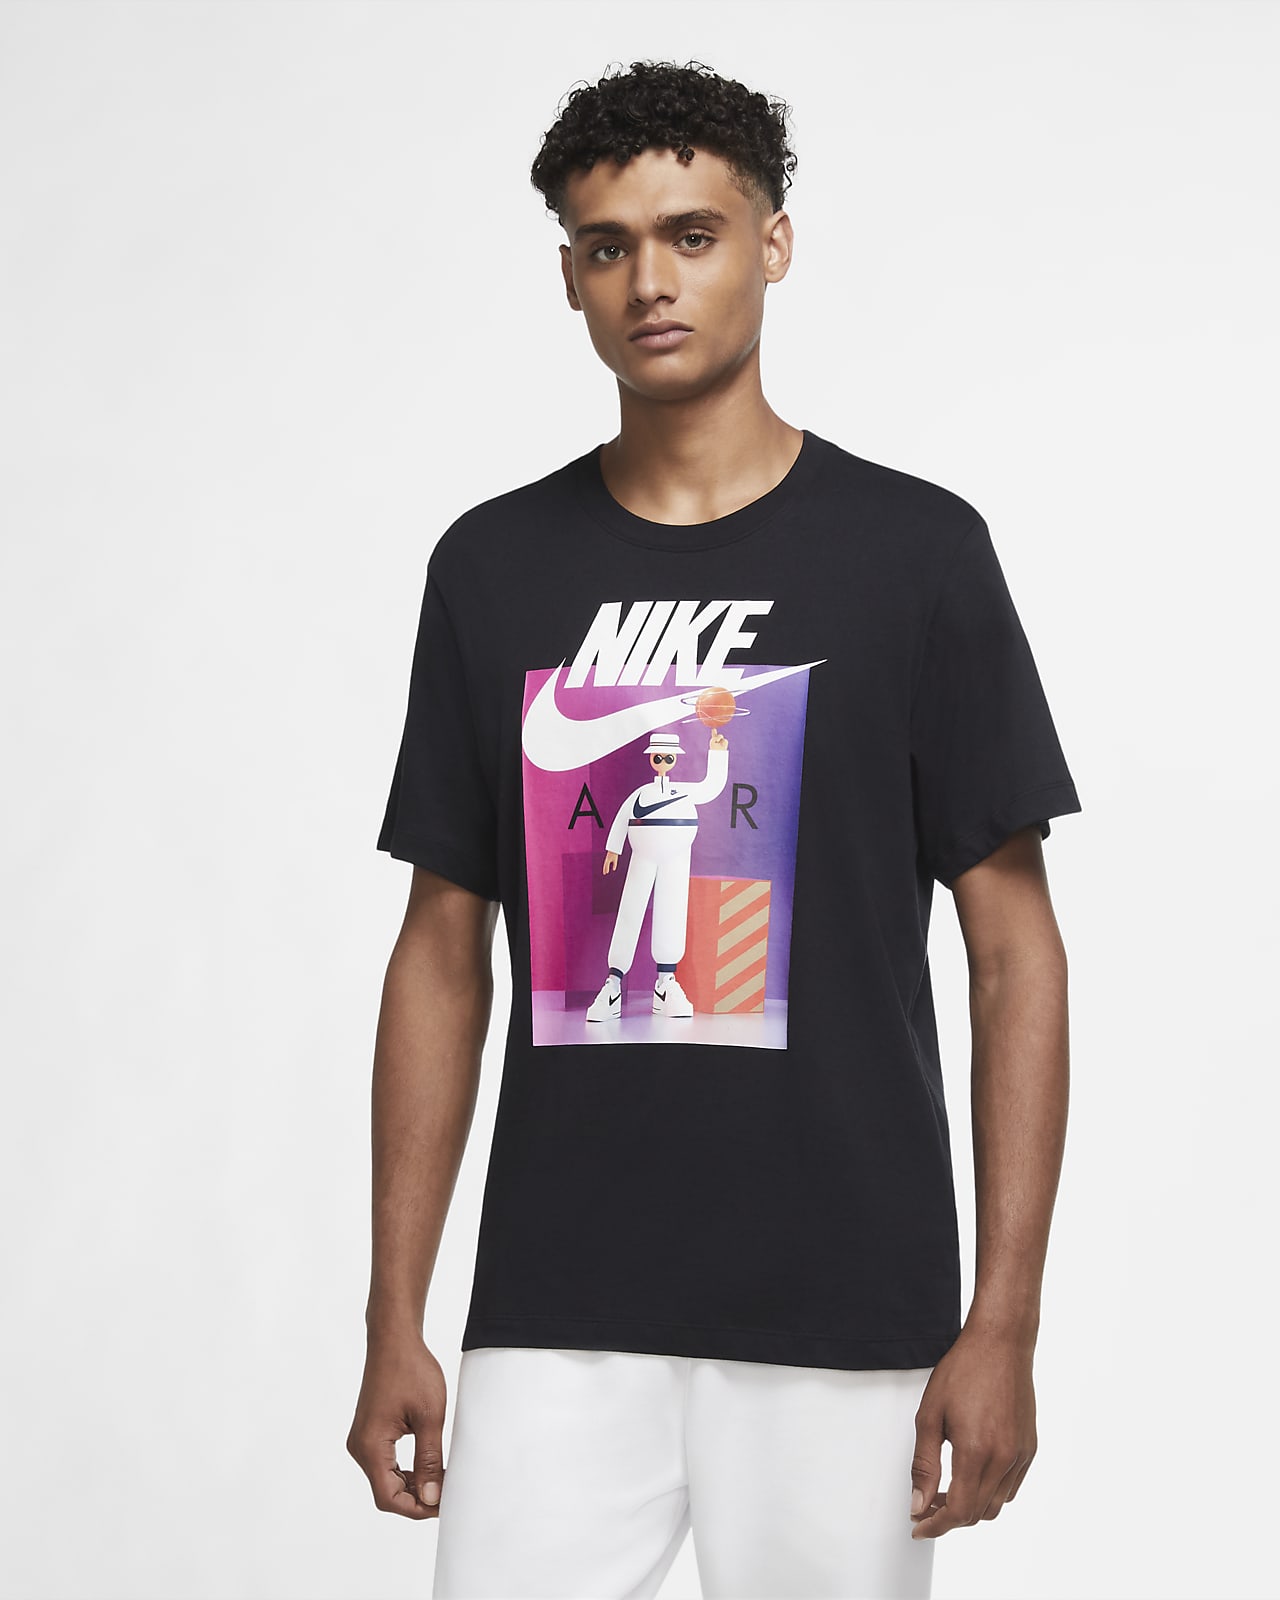 Nike T Shirt Graphic | vlr.eng.br